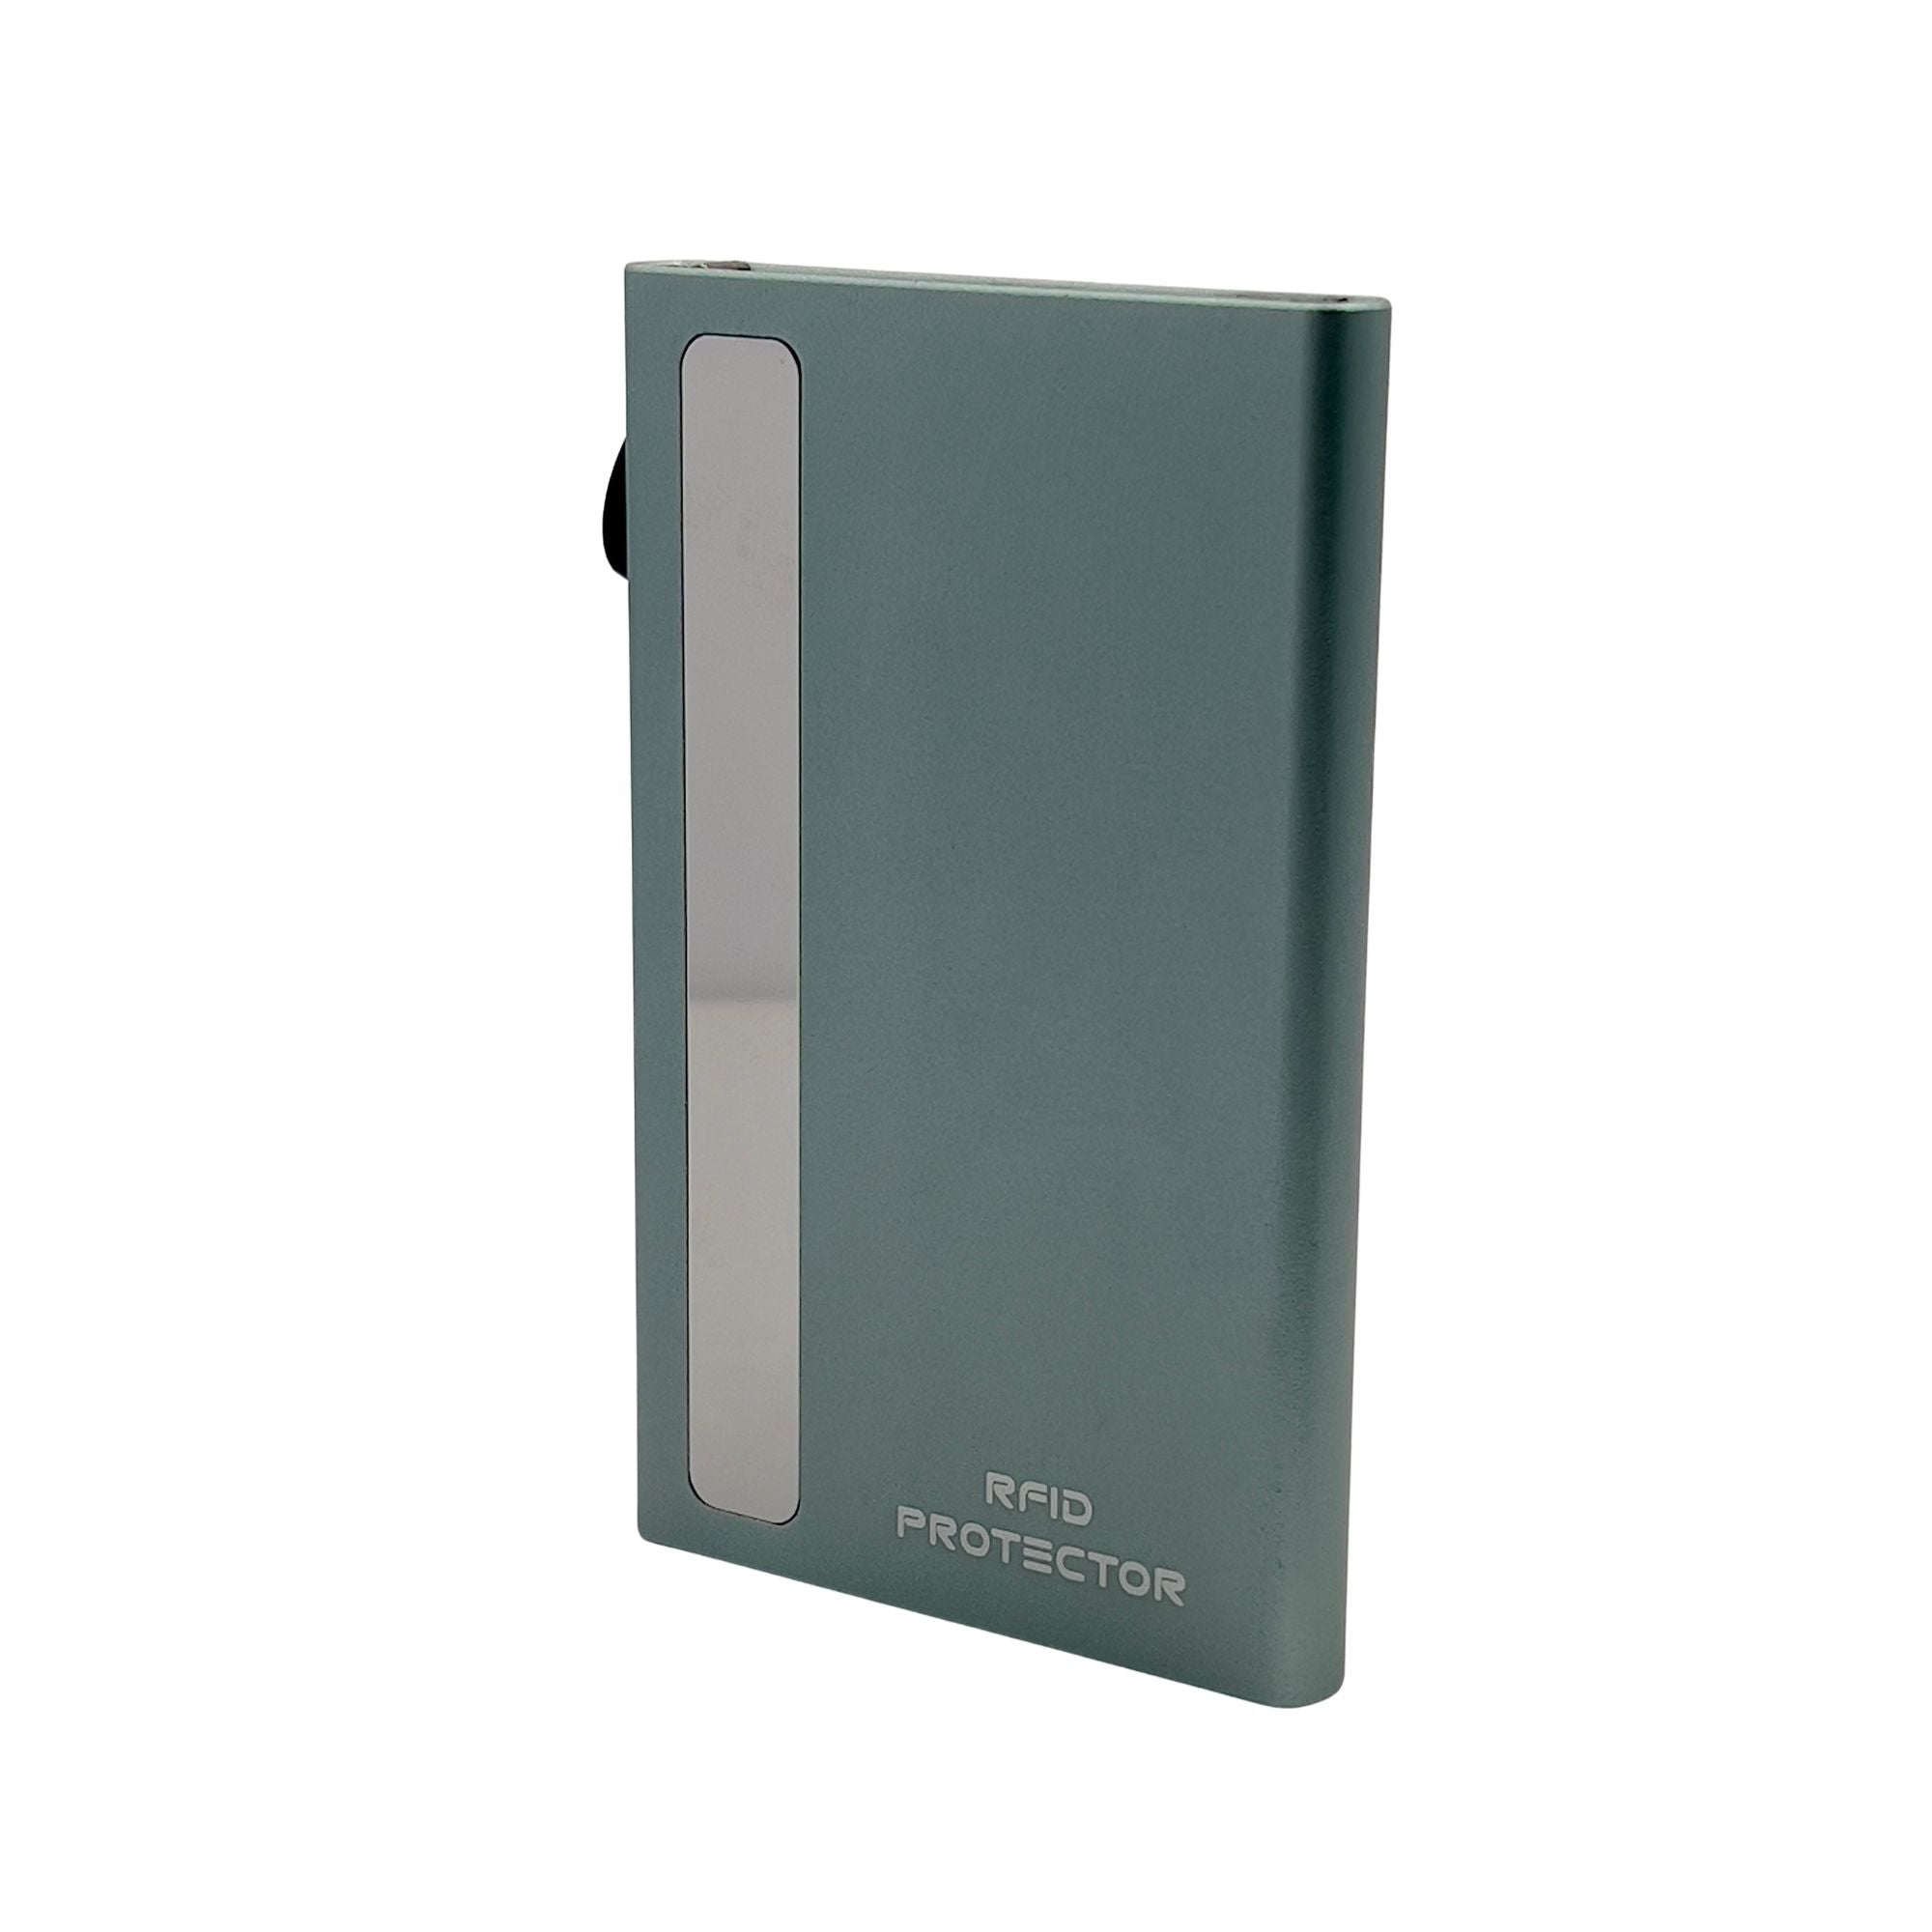 New CardHolder 4.0 Metal with Tesa double-sided tape 